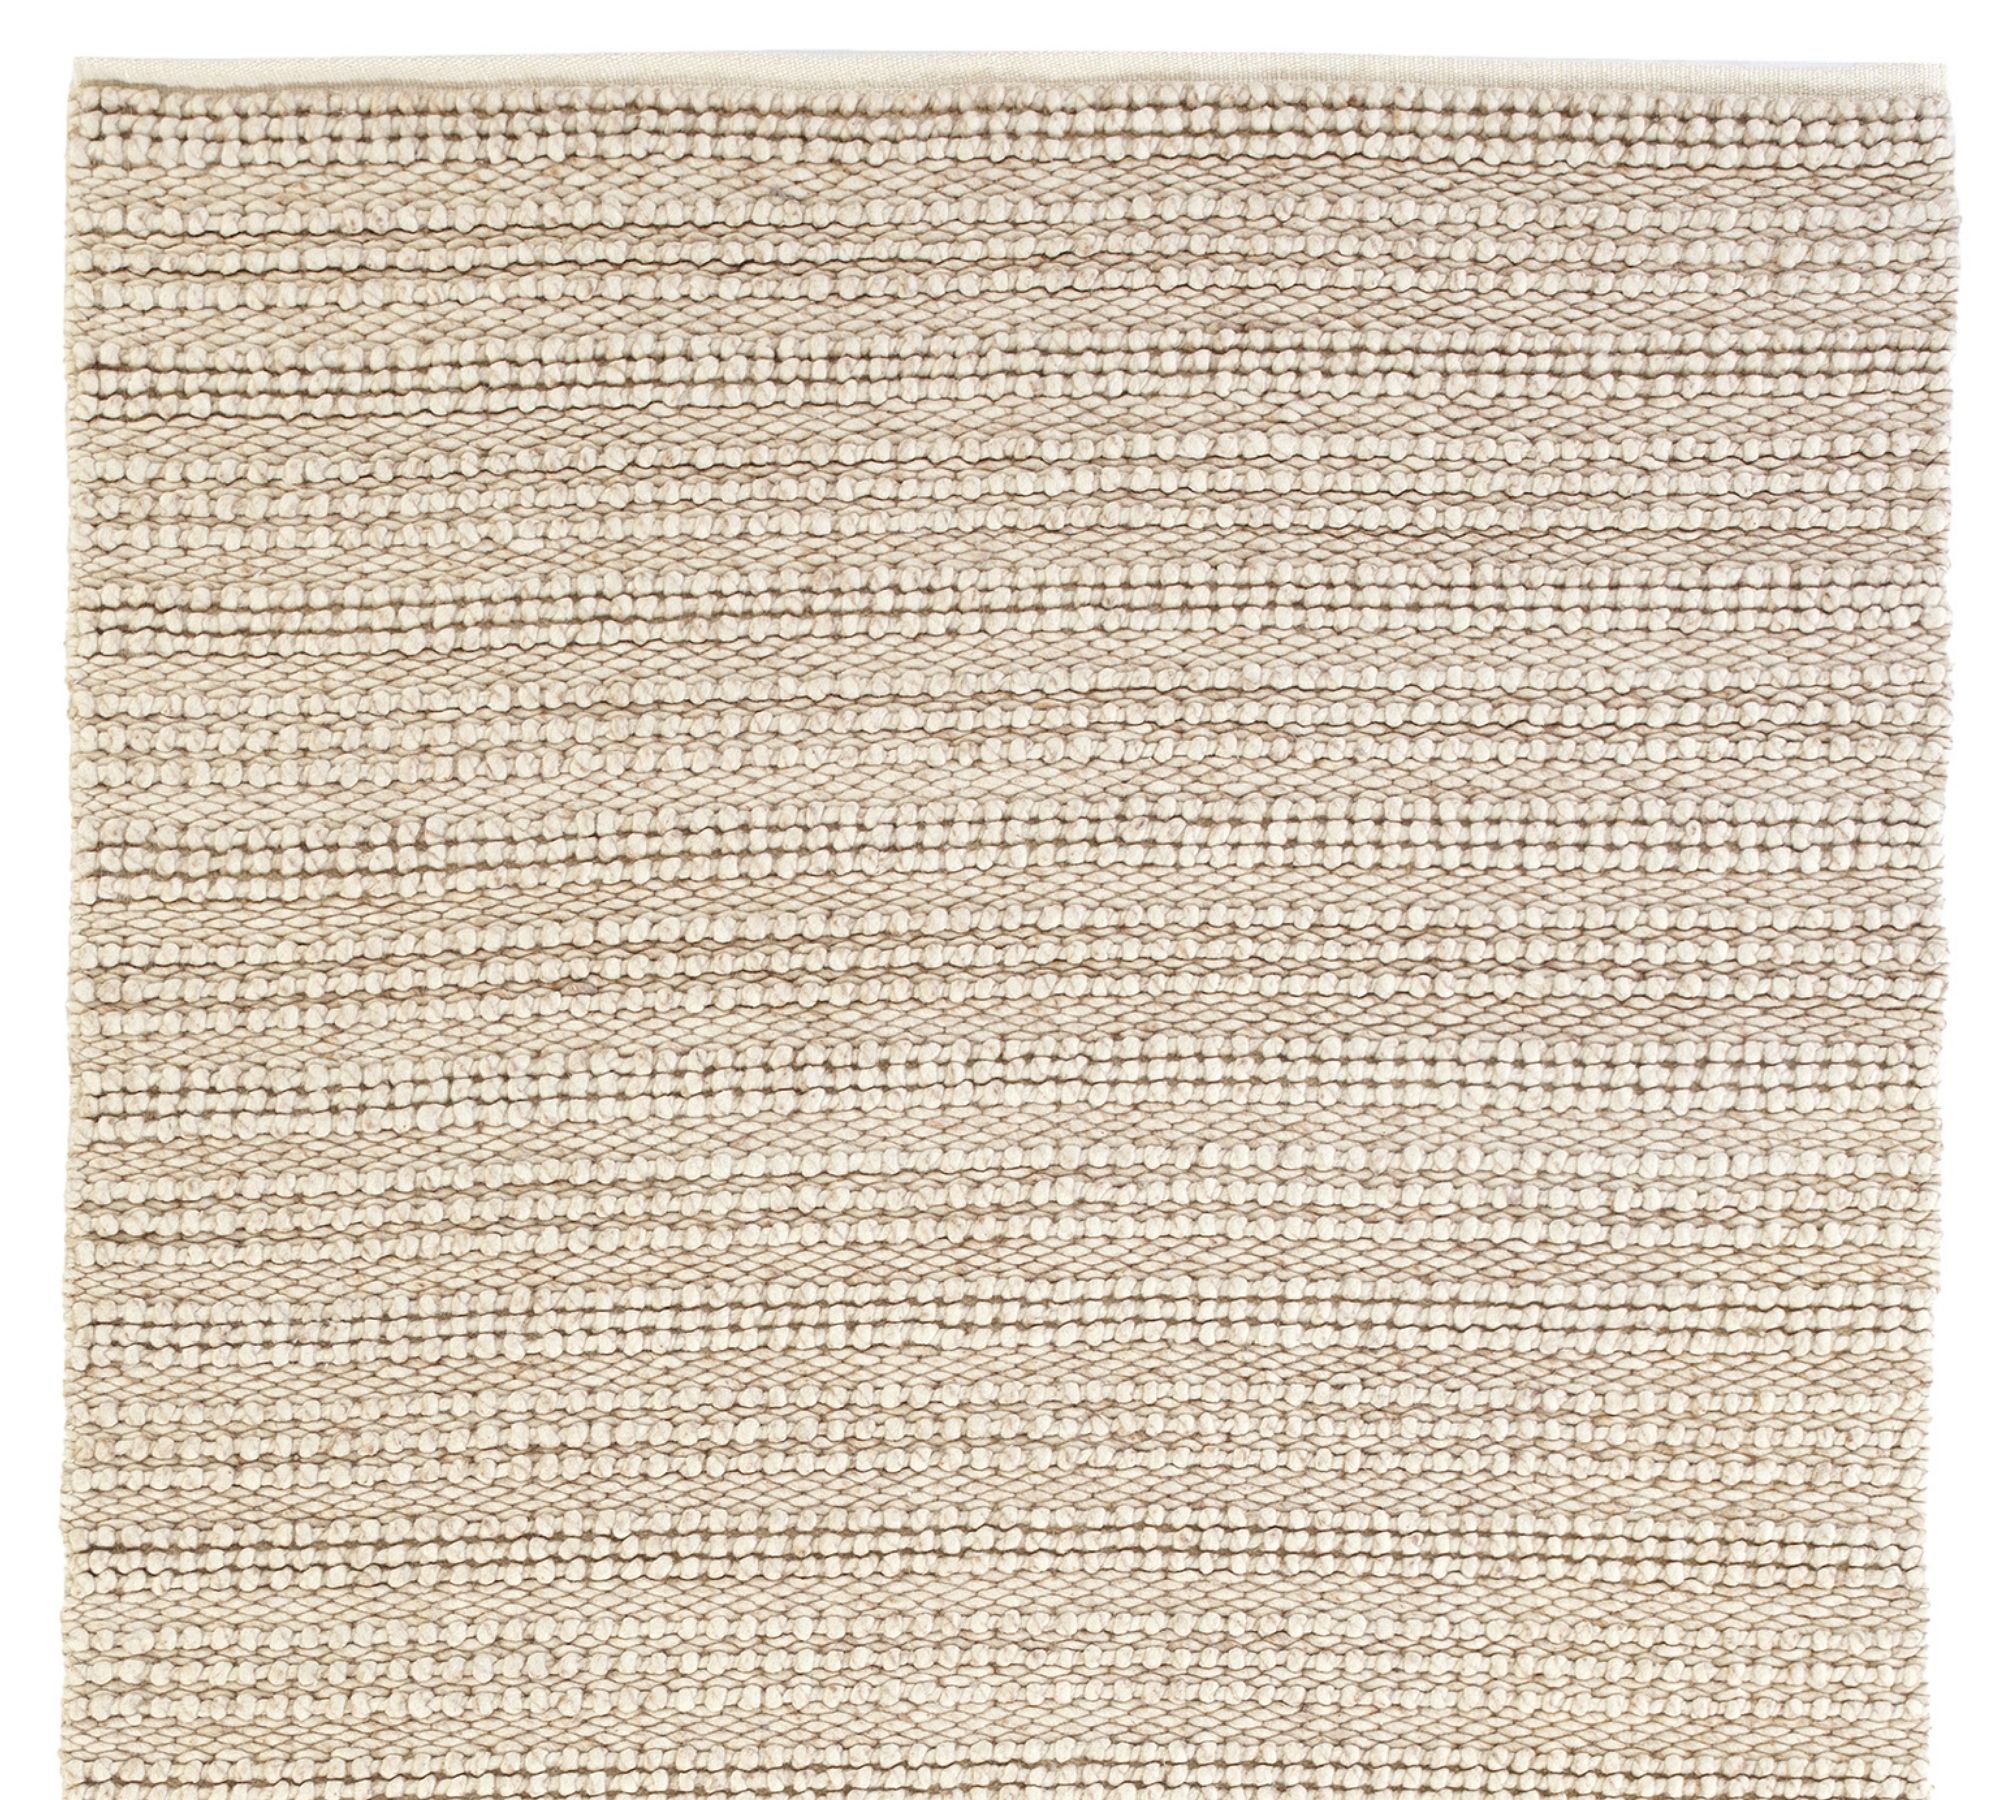 Chunky Ribbed Sweater Rug Swatch - Free Returns Within 30 Days